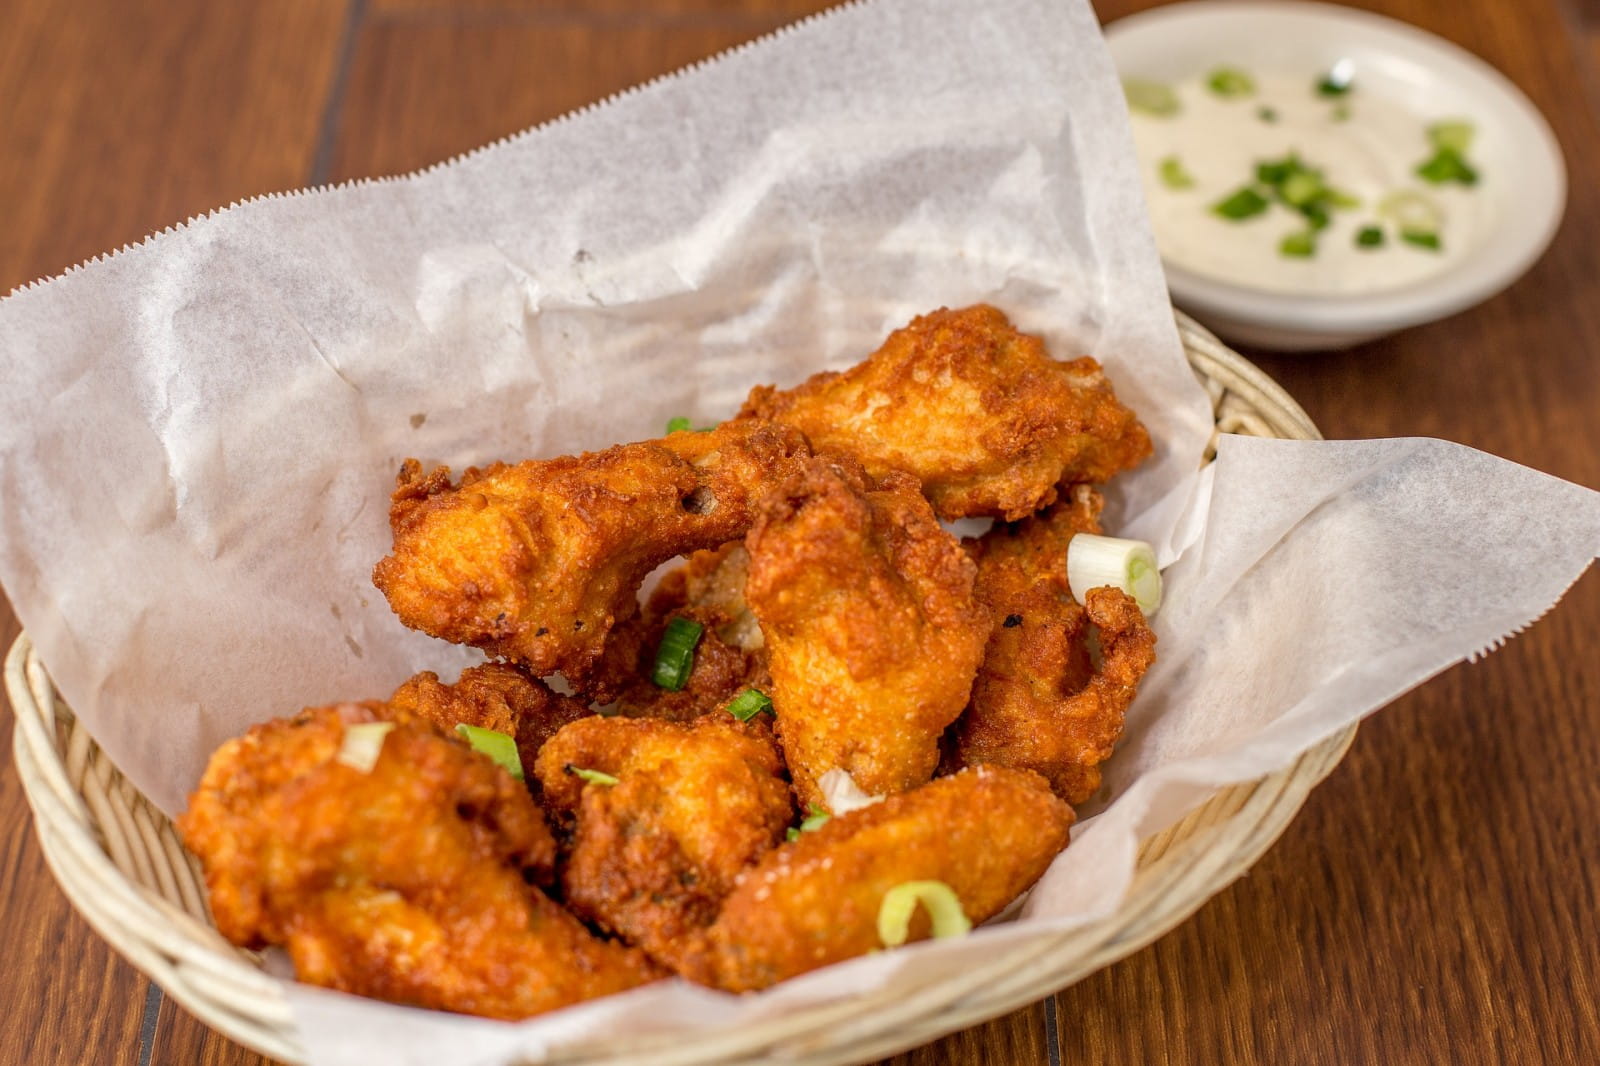 What to drink with chicken wings (and your other Superbowl snacks)